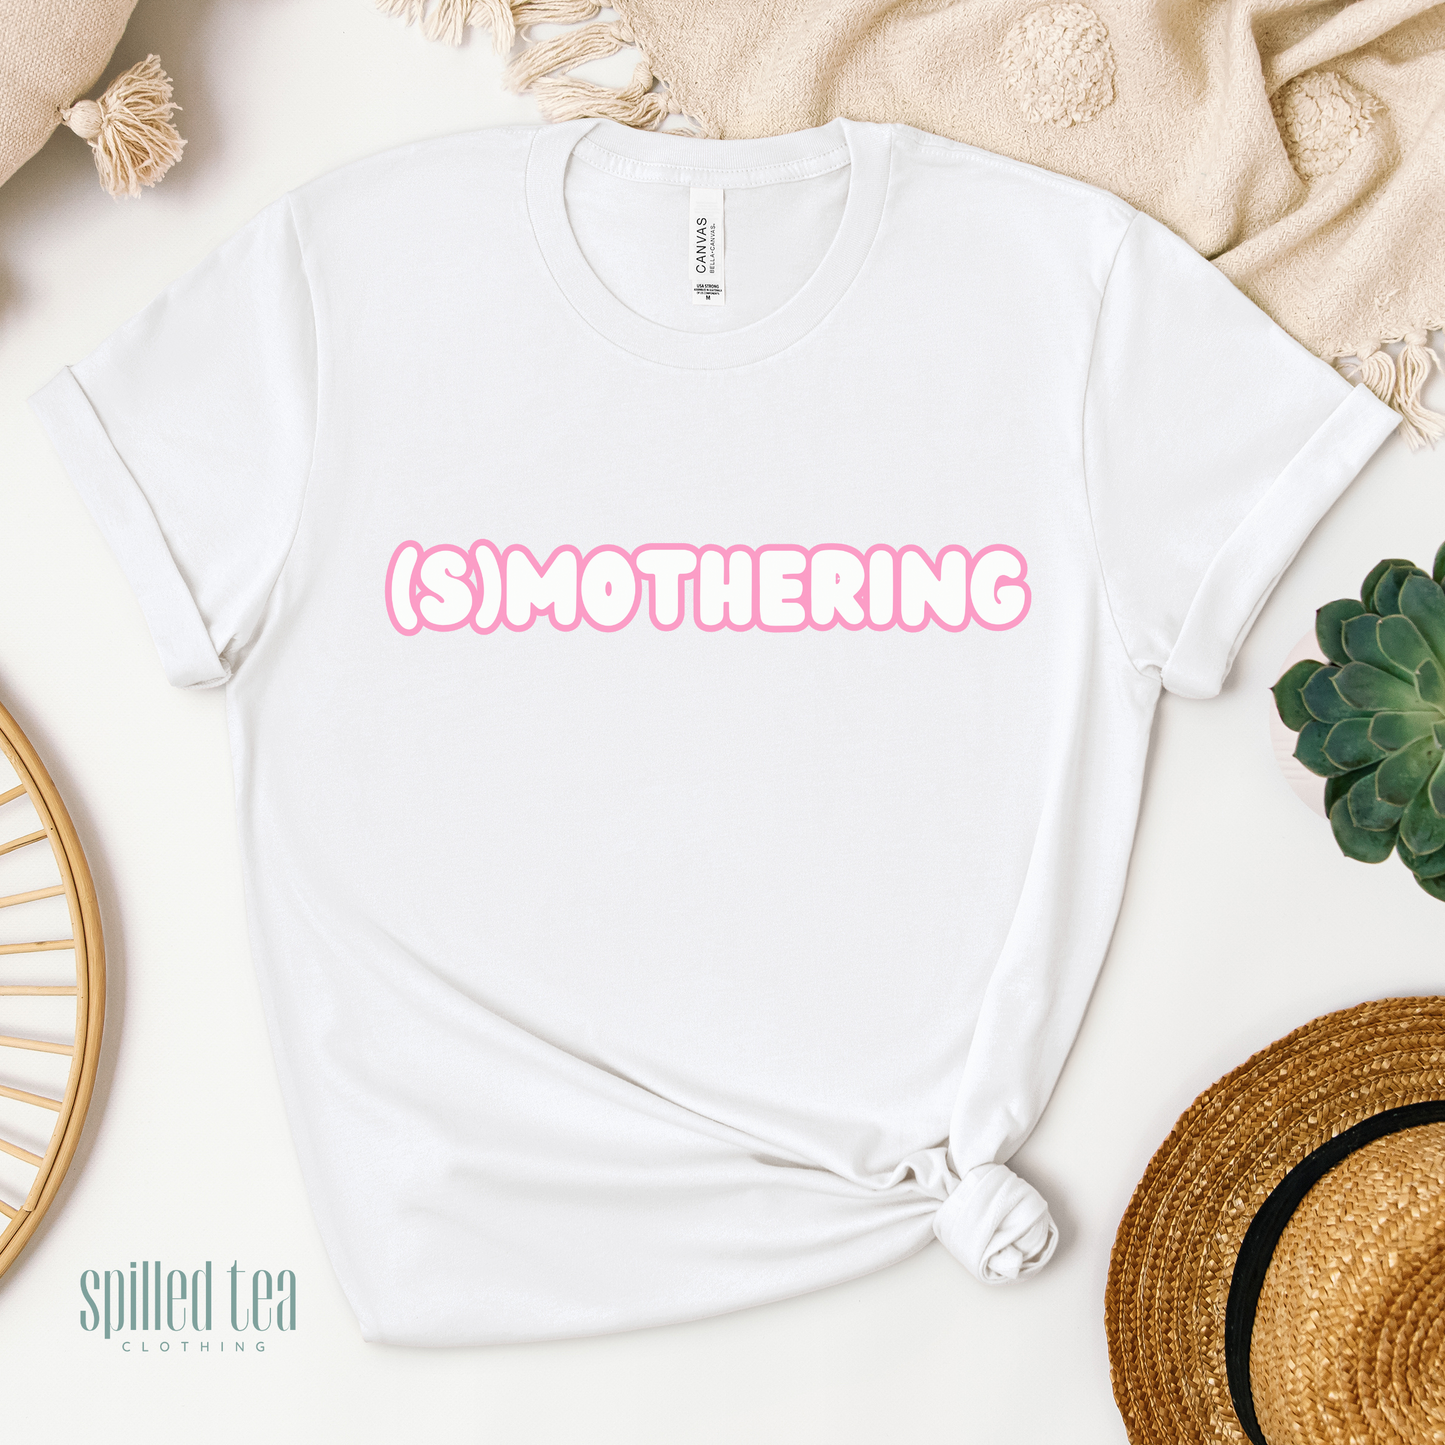 Smothering T-Shirt